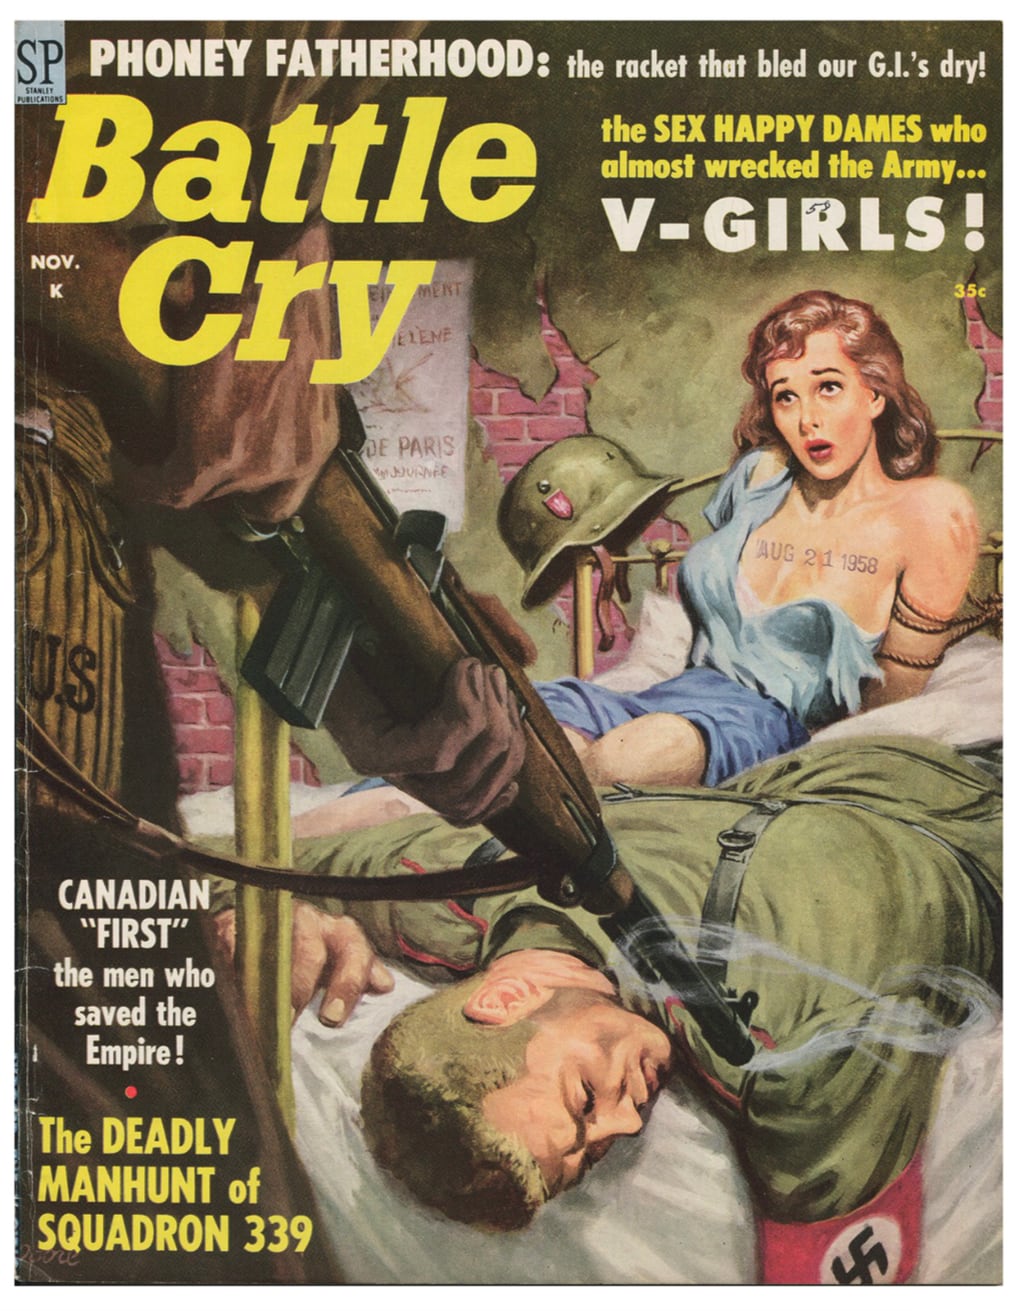 Ww2 American Porn - War, heroism and sex: Pulp magazines & the messages they perpetuated